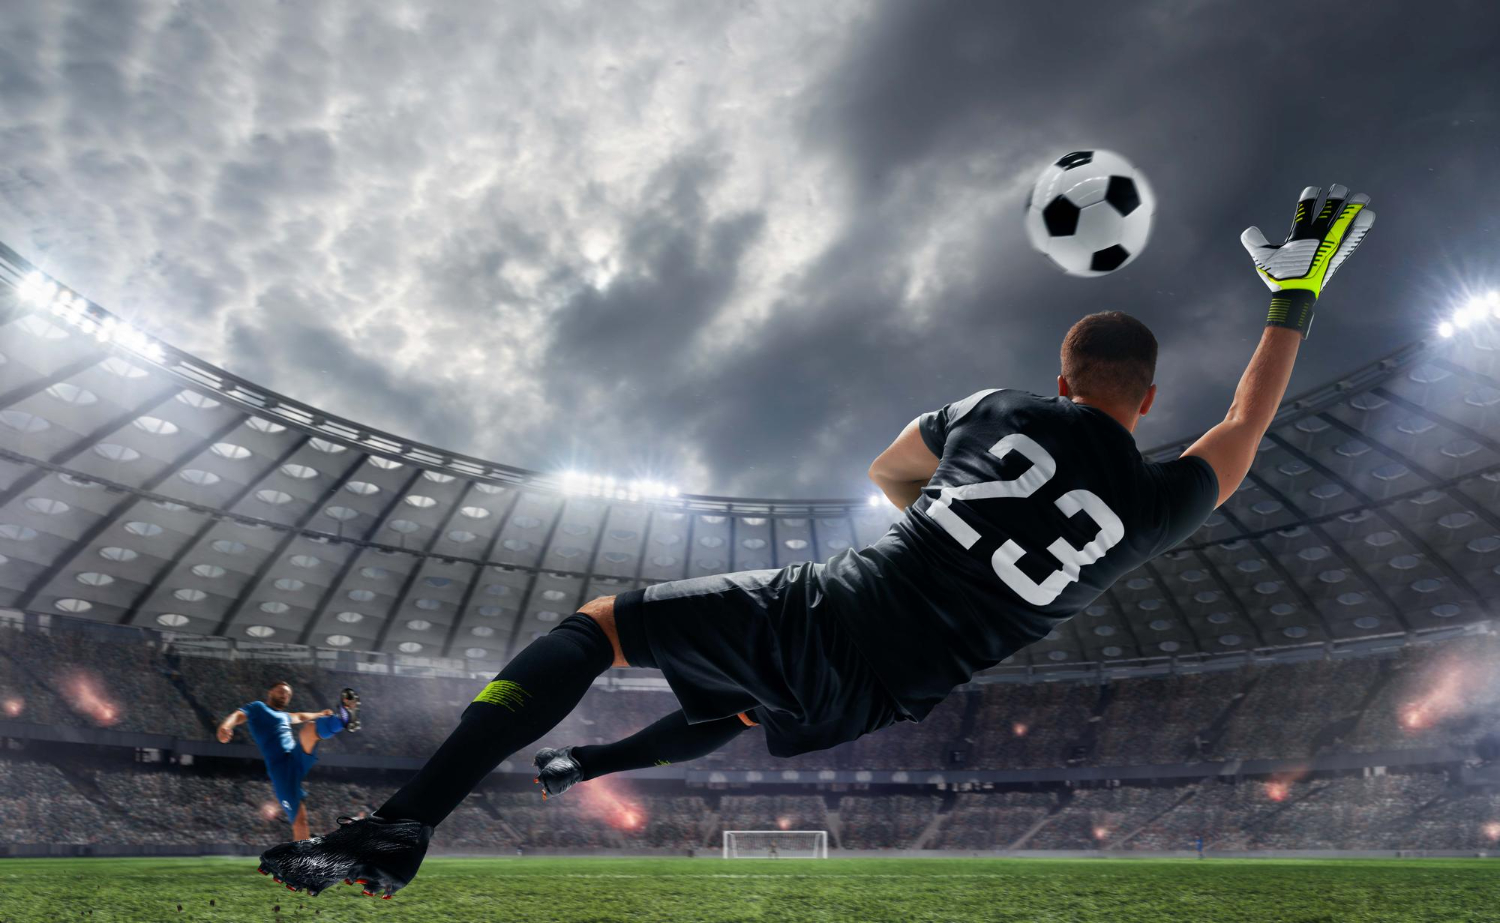 Soccer Platform Predictions - Winning Strategies For The Best Bets